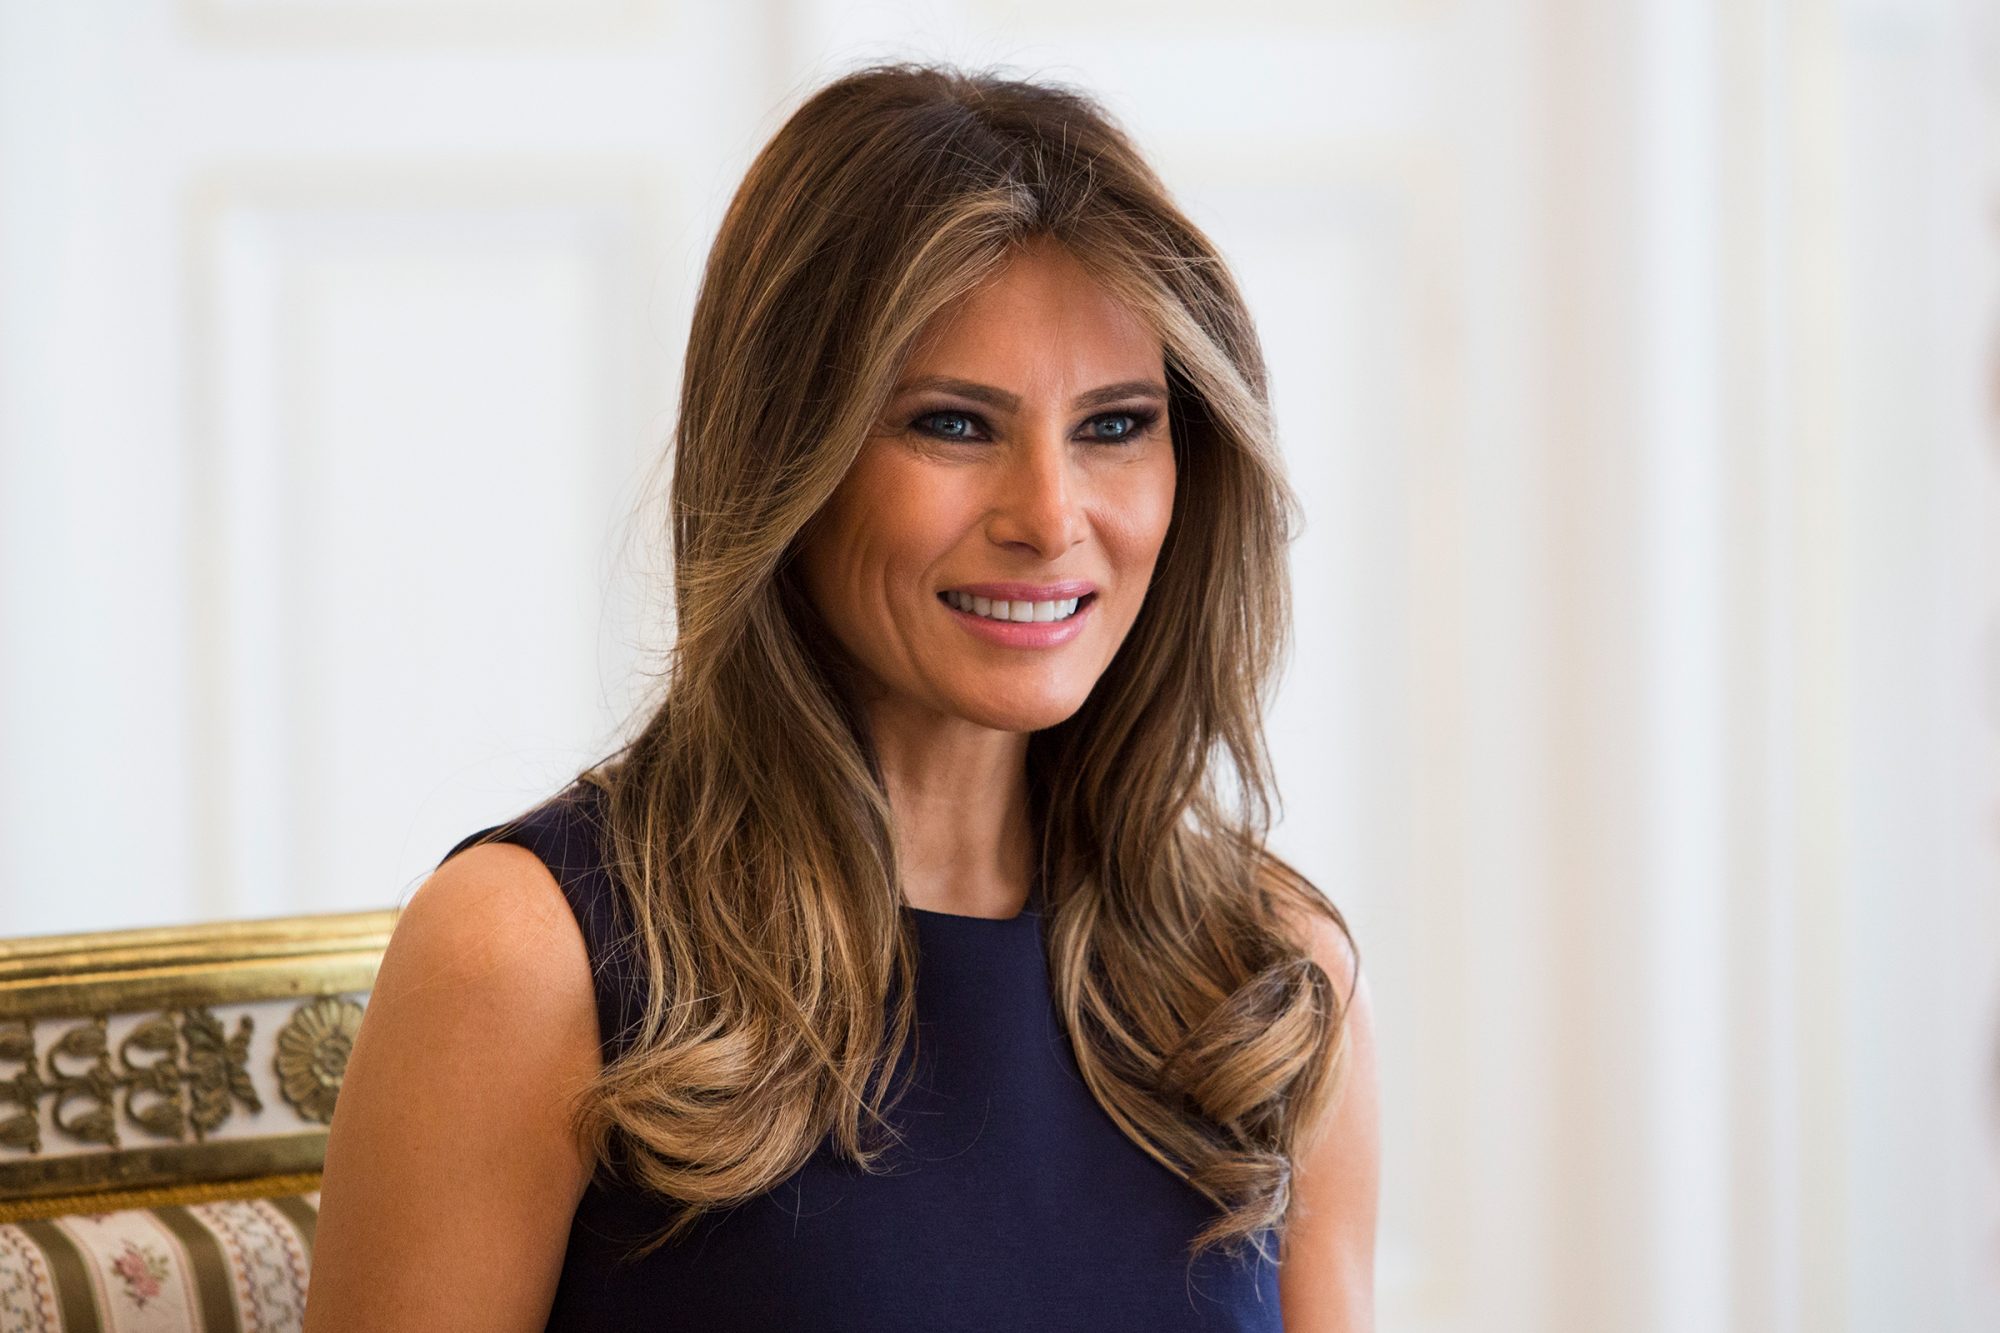 Melania Trump 'Bought Herself' NFT Collection for $170,000